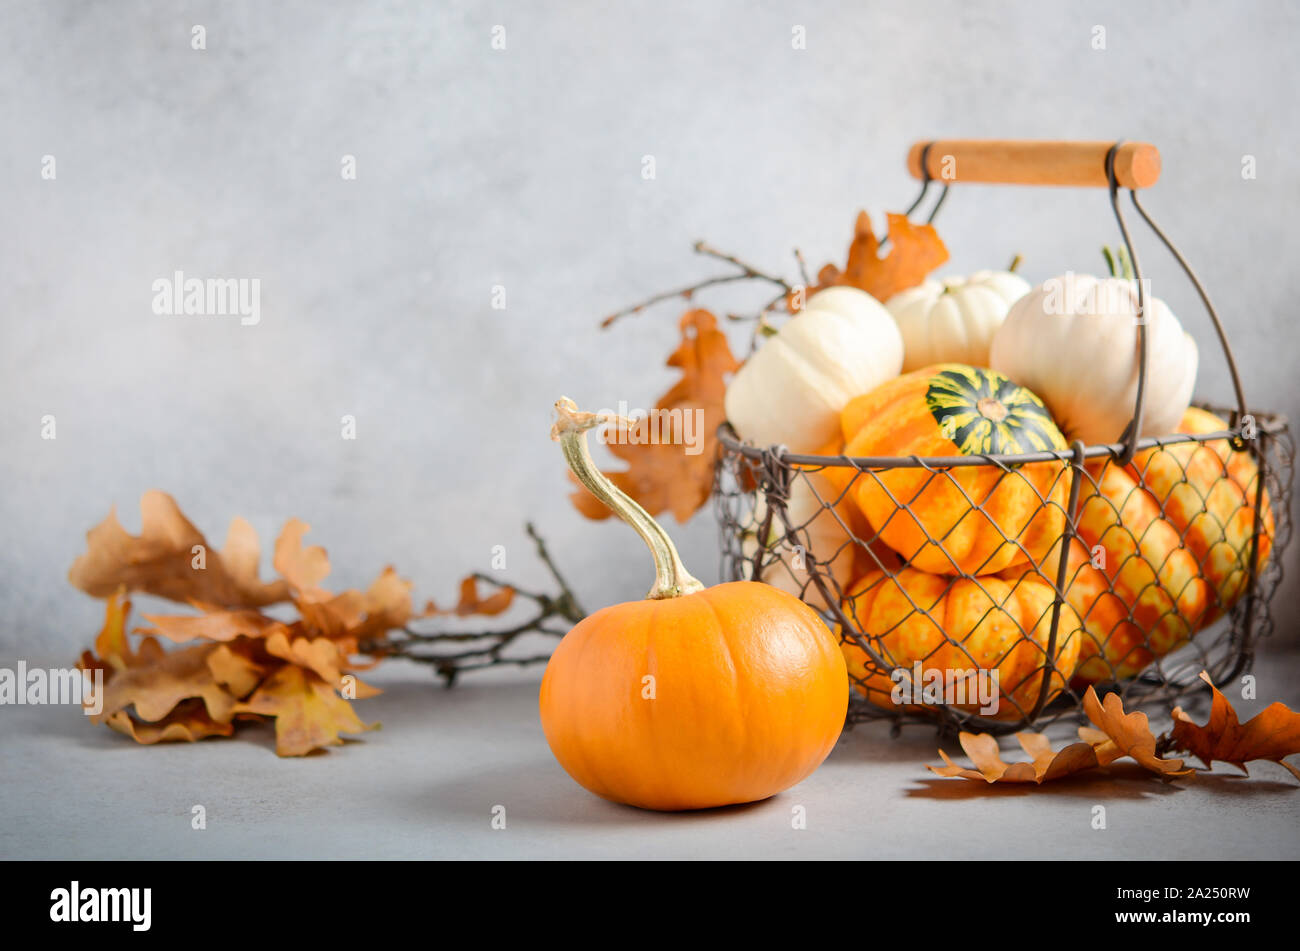 Autumn background with mini pumpkins in a basket on a gray concrete background. Stock Photo